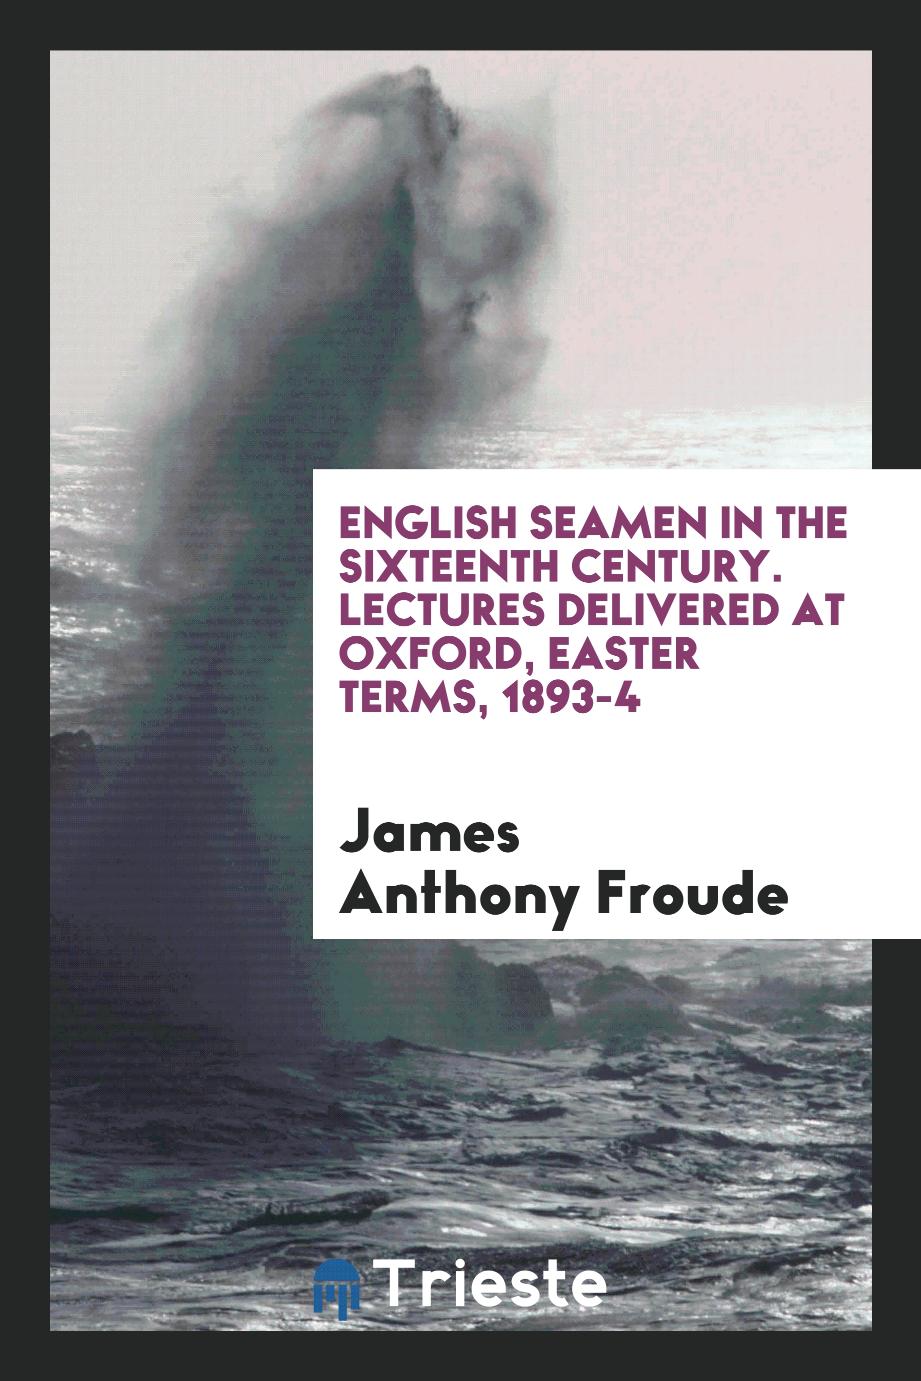 English seamen in the sixteenth century. Lectures delivered at Oxford, Easter terms, 1893-4